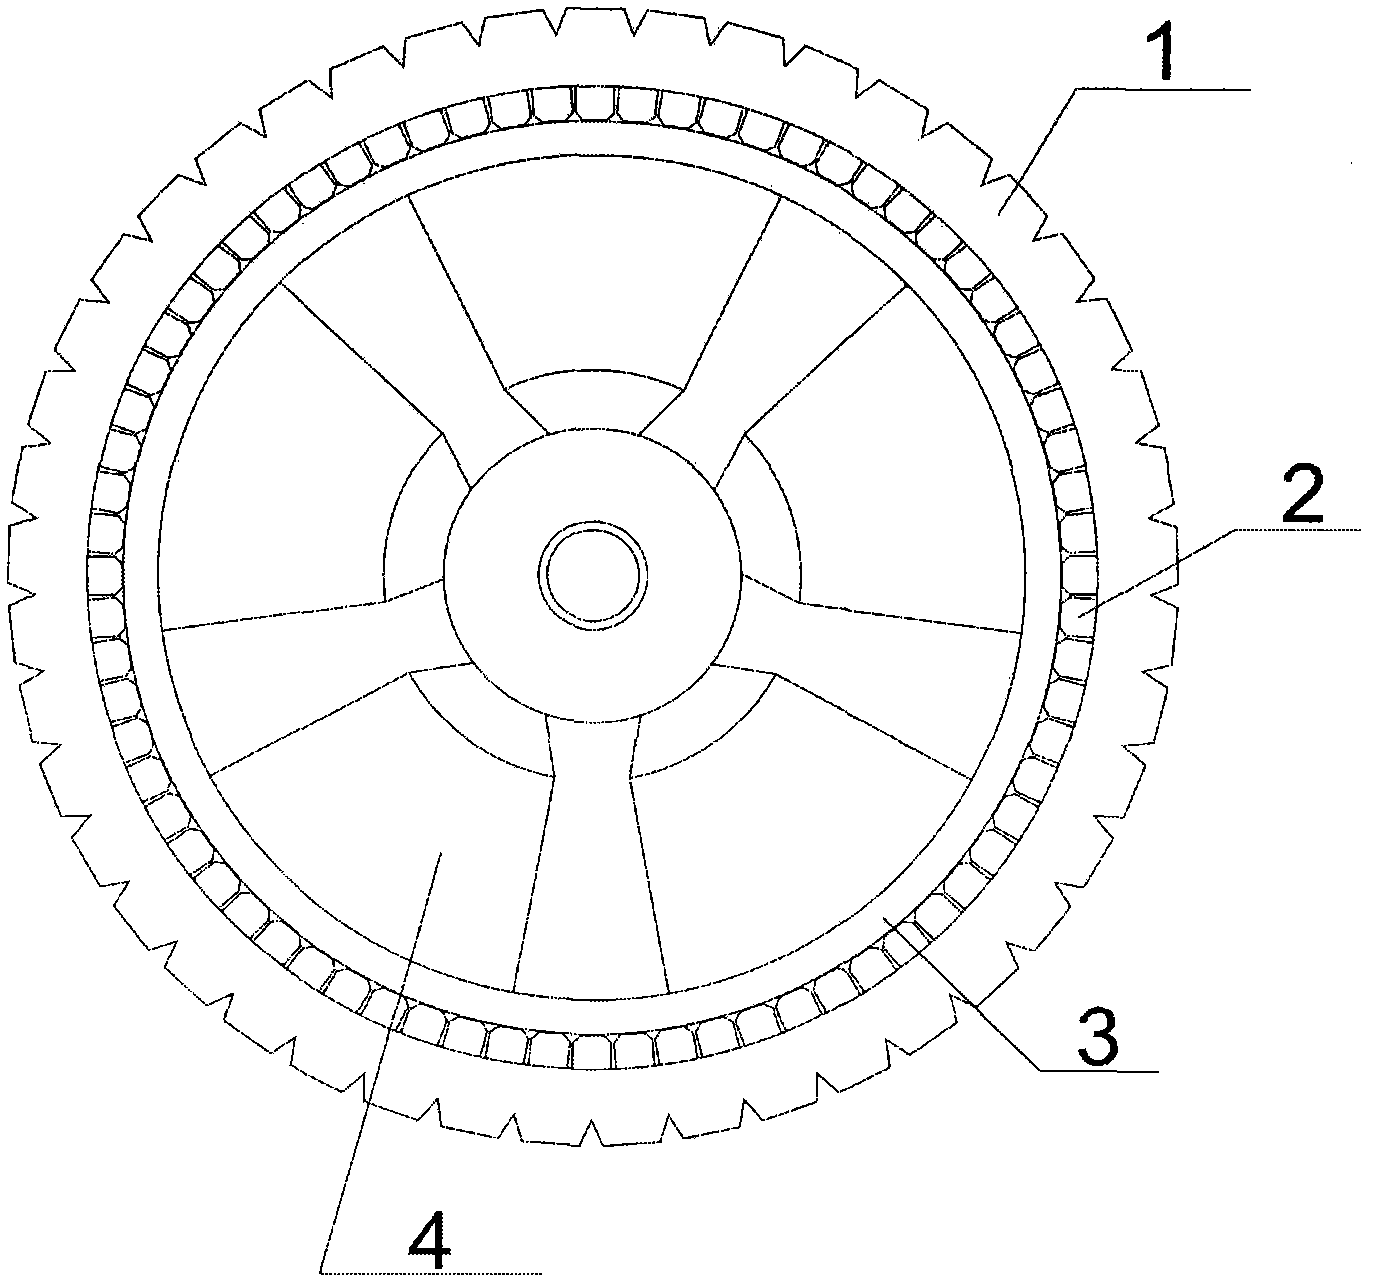 Tire with novel inner structures